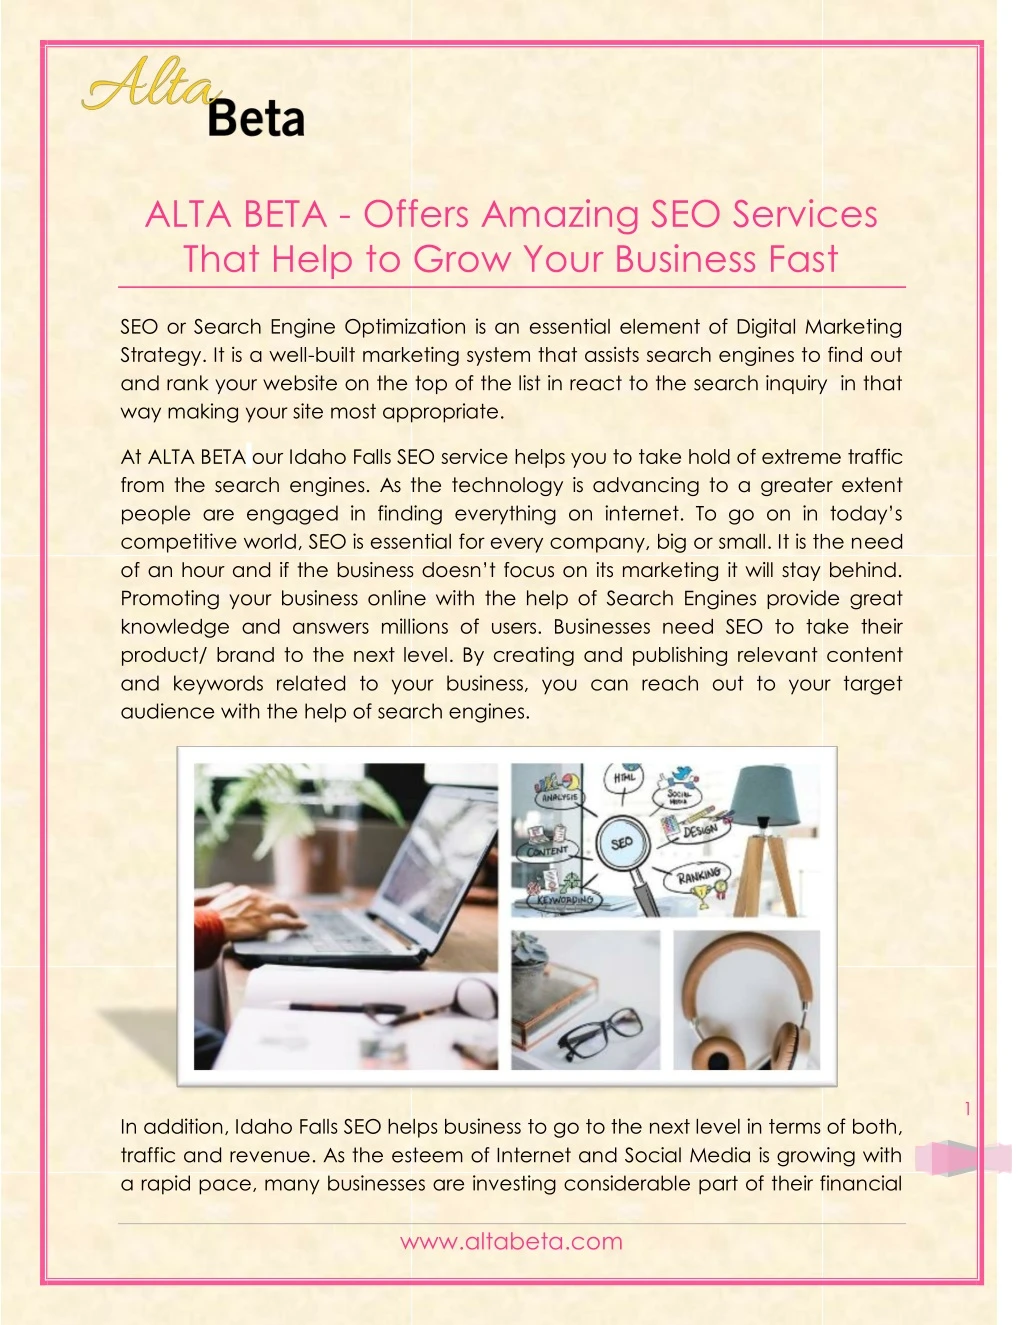 alta beta offers amazing seo services that help